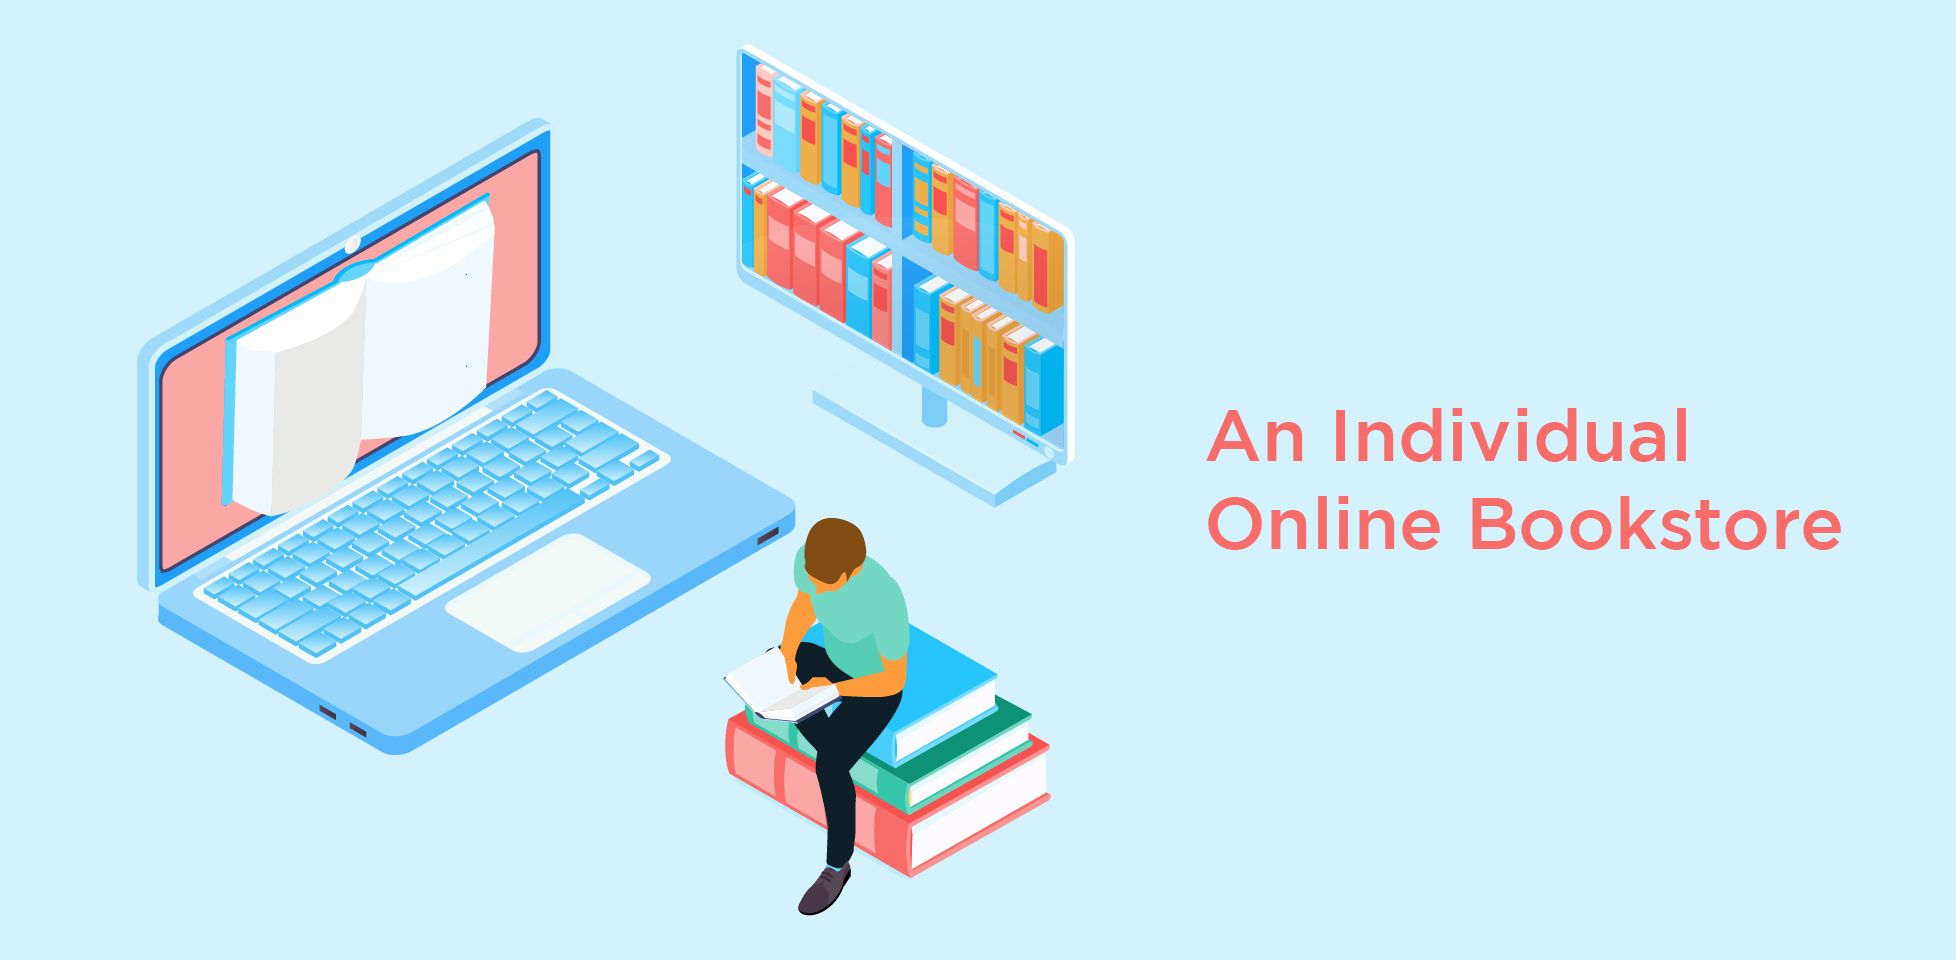 An Individual Online Bookstore